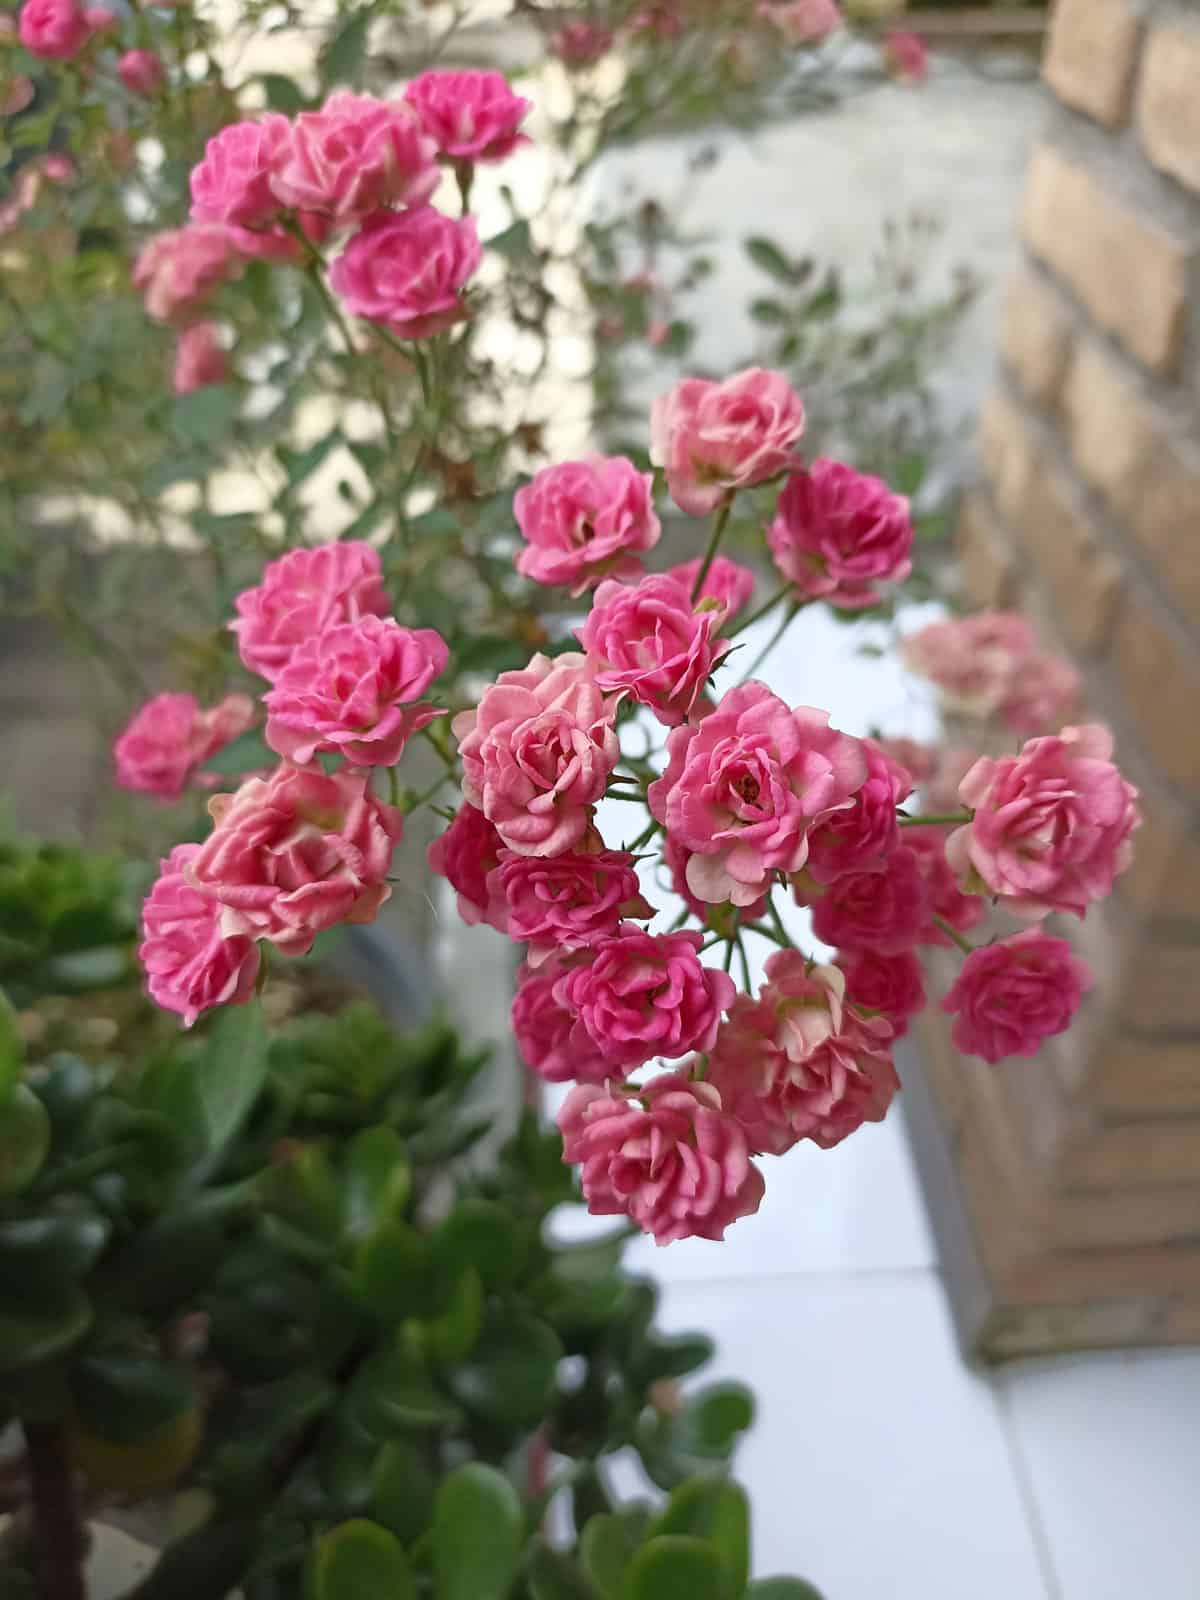 Blooming pink roses of a Miniature rose